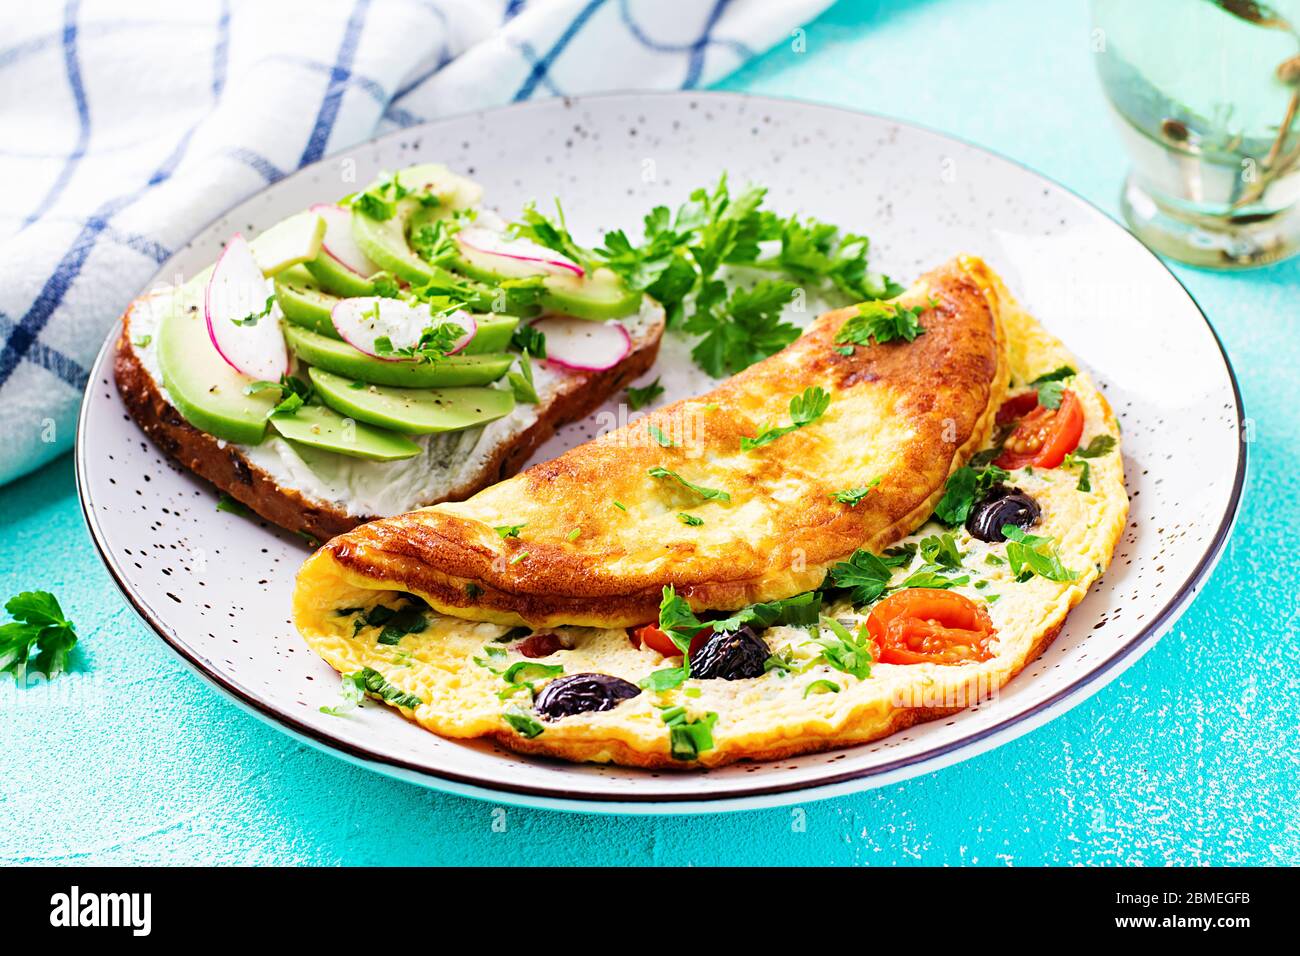 Breakfast. Omelette with tomatoes, black olives and sandwich with avocado on white plate.  Frittata - italian omelet. Stock Photo